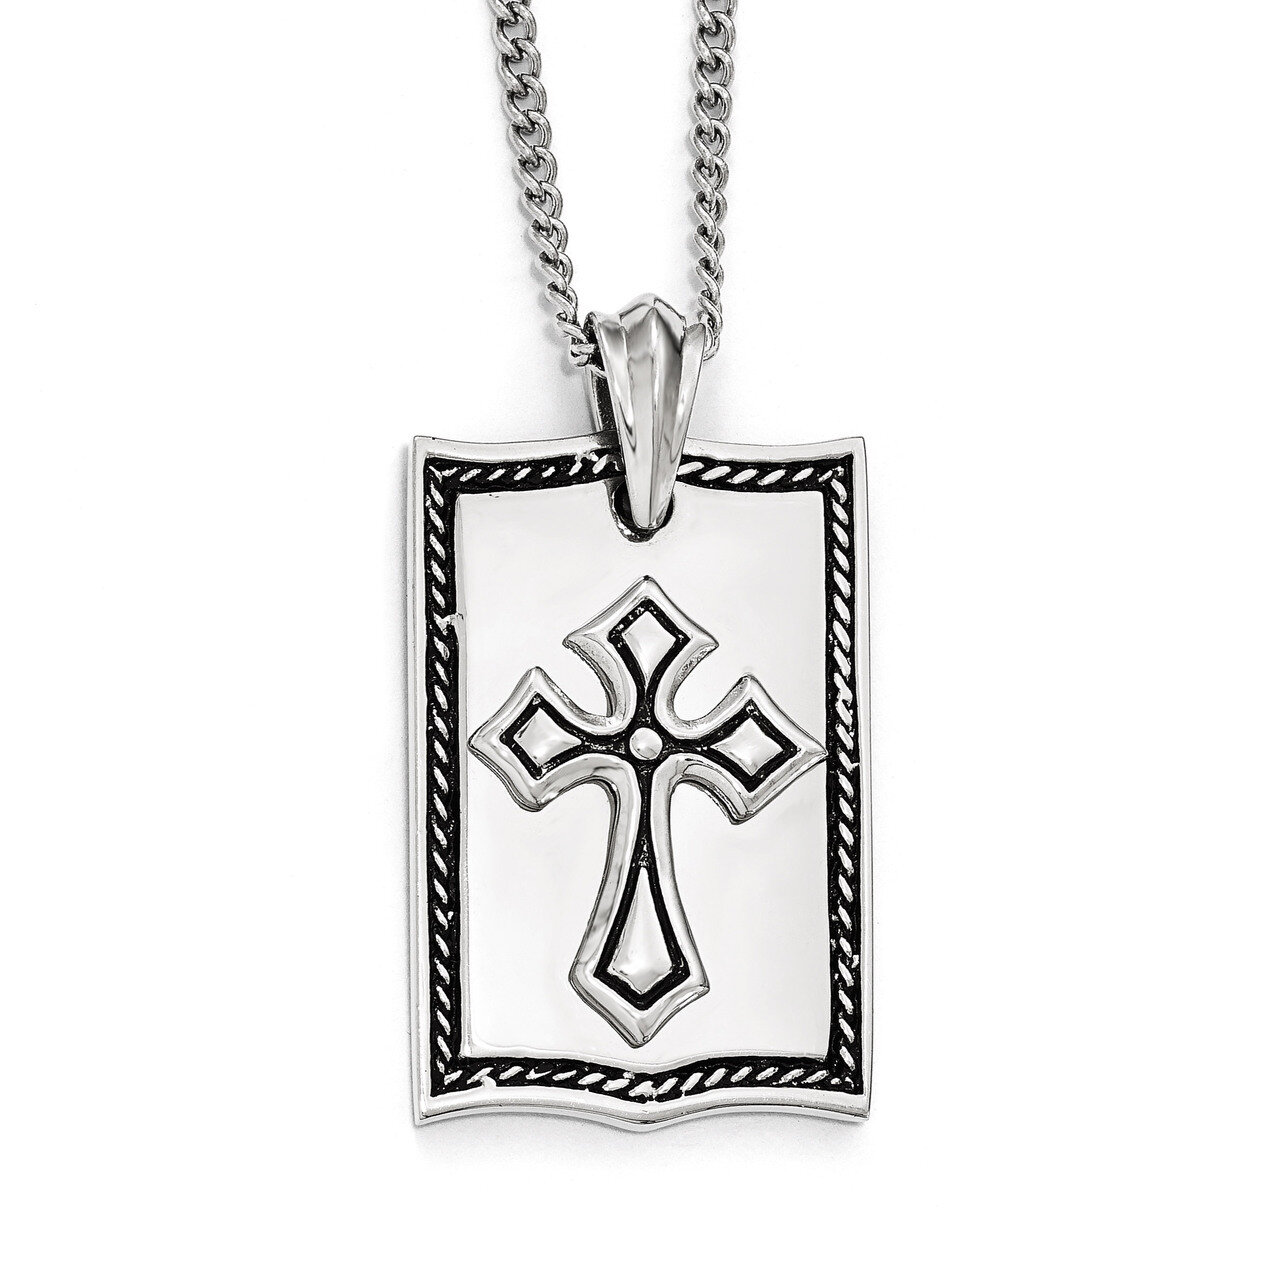 Antiqued Cross Dog Tag Necklace - Stainless Steel SRN1926-24